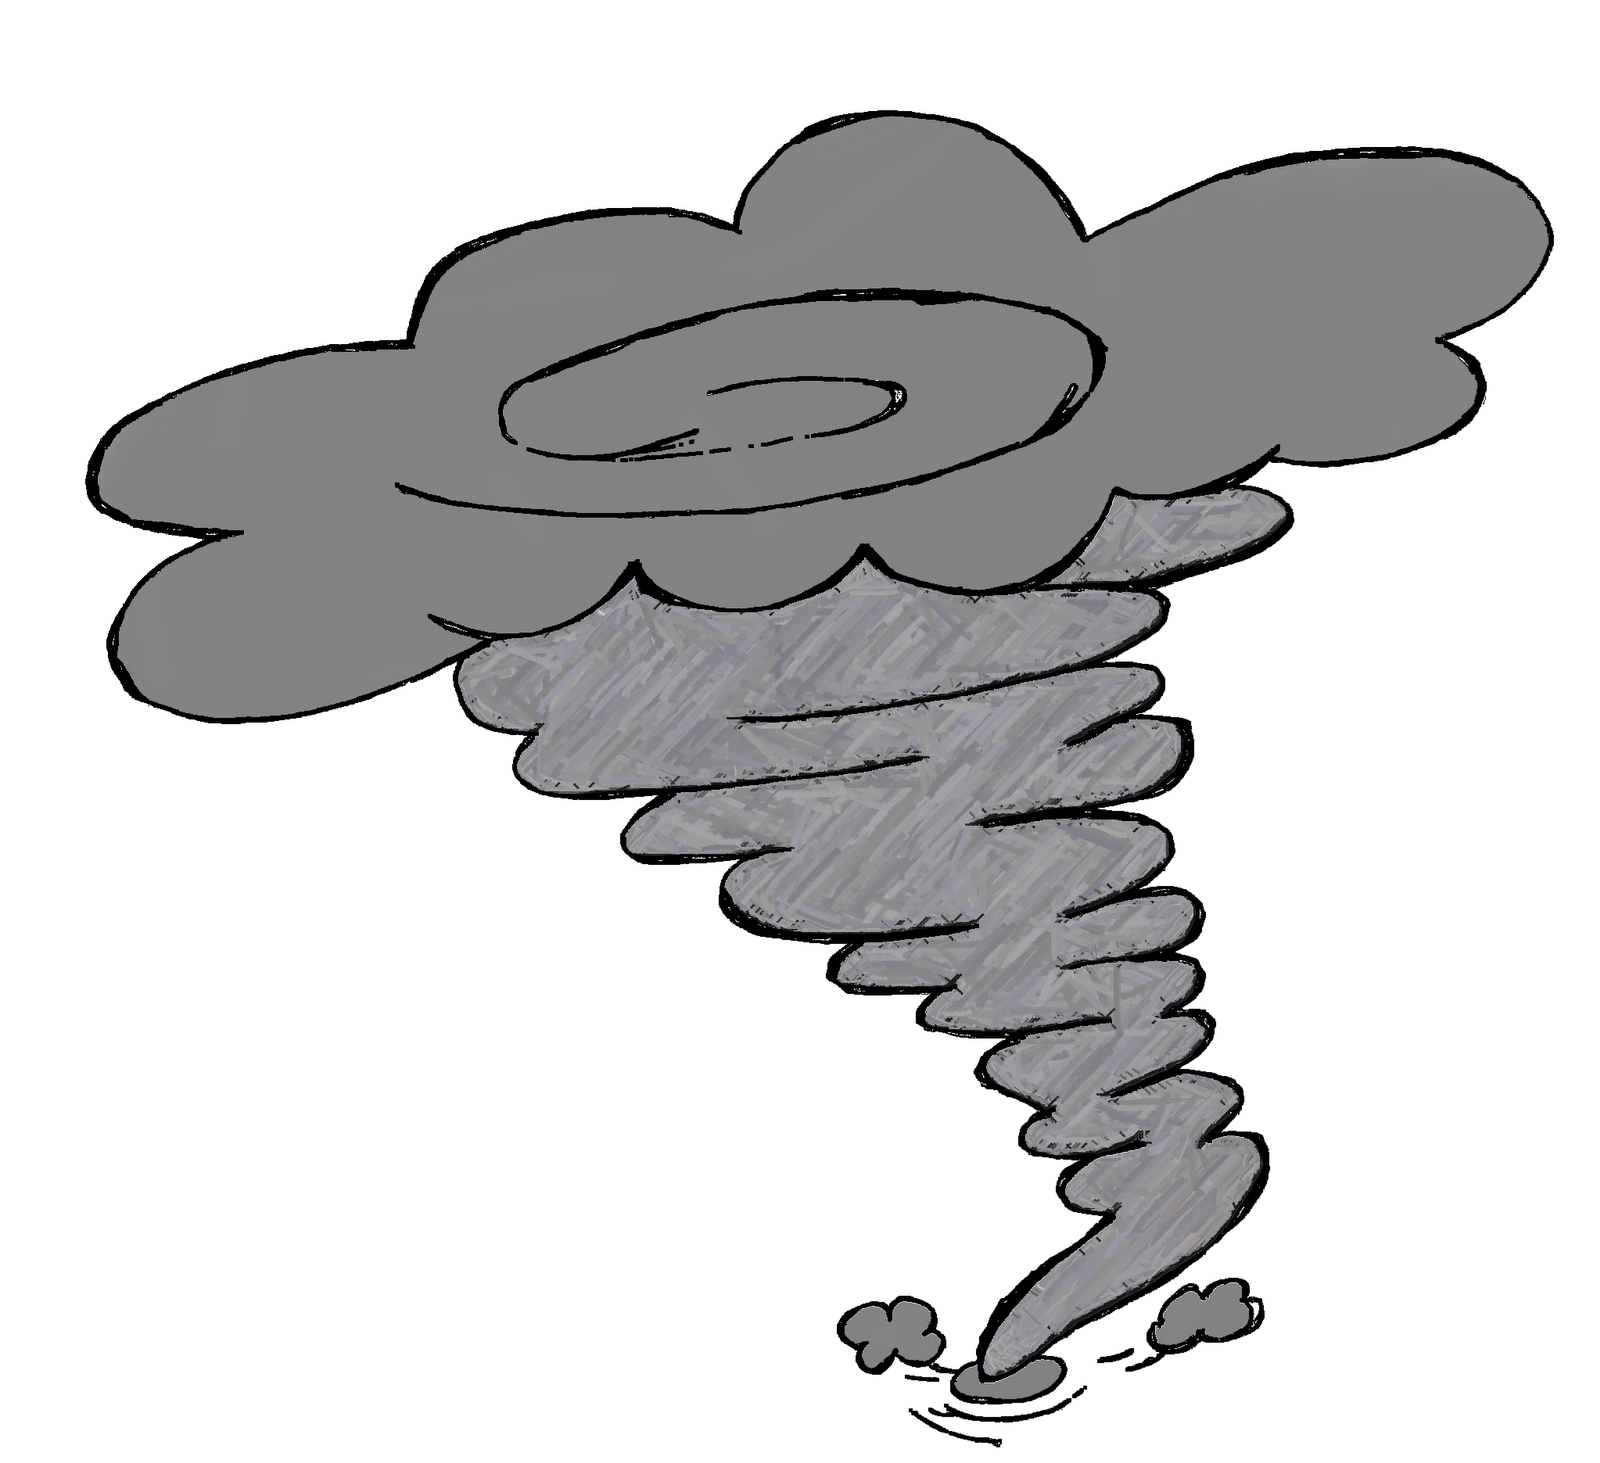 Tornado Clipart Black And White | Clipart Panda - Free Clipart Images